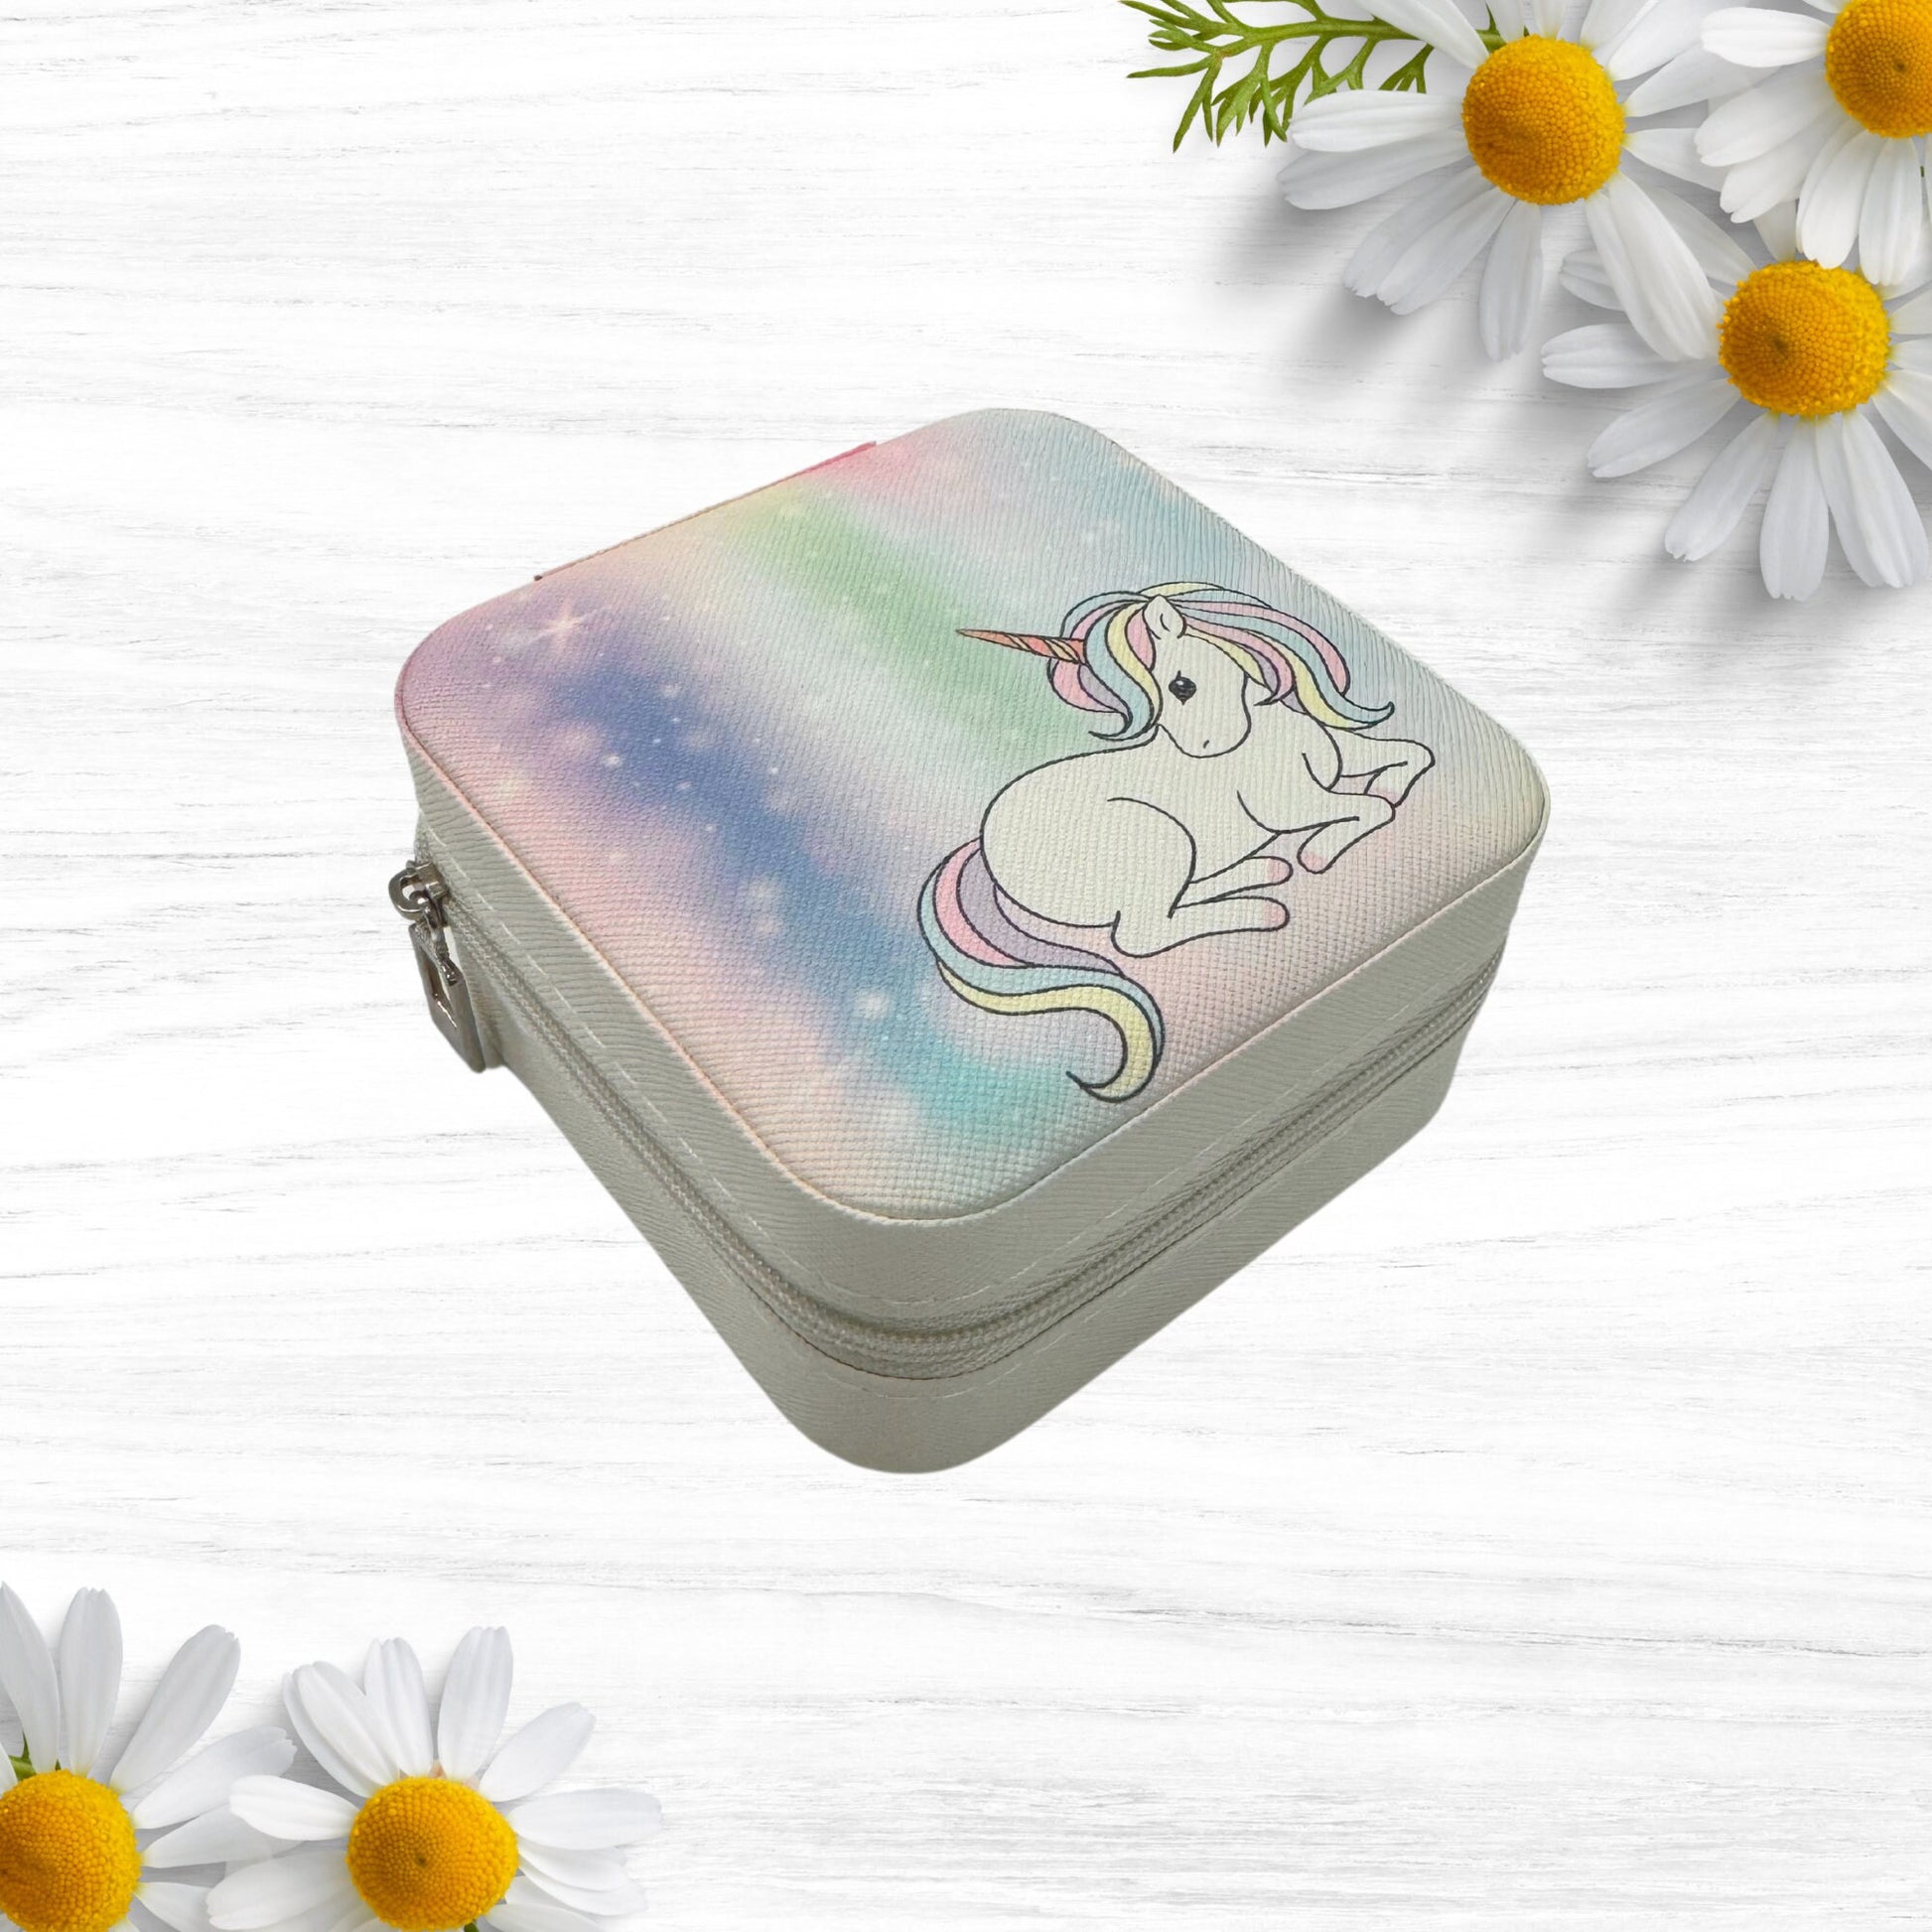 Personalized Unicorn Jewelry Case, with or without name, Custom Printed Jewelry Box with Name & Unicorn, Great Young Girl Gift Idea